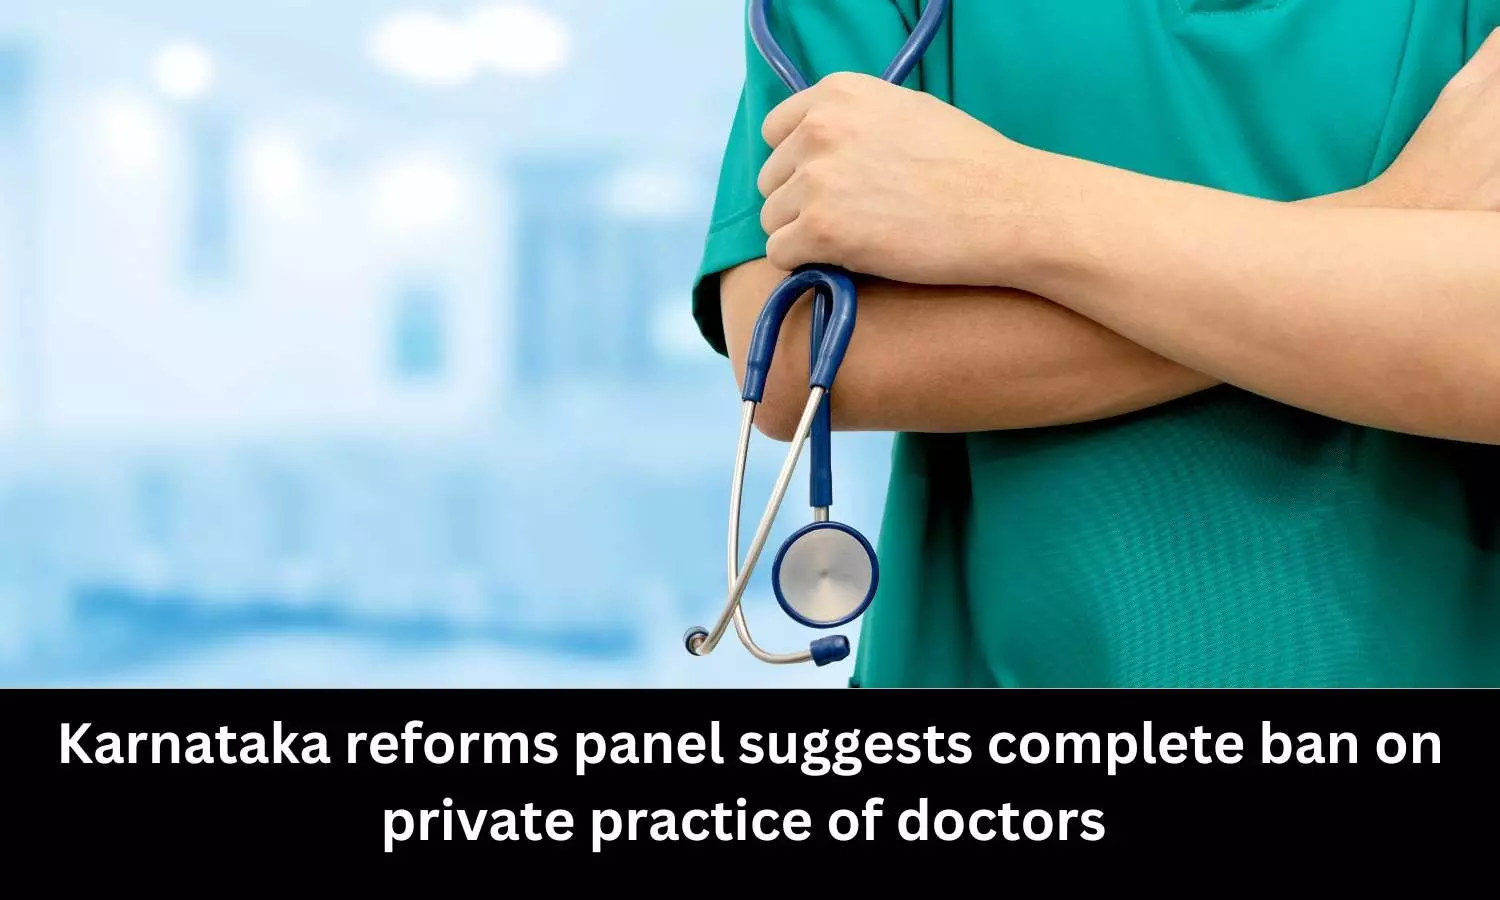 Complete ban on private practice of doctors, suggests Karnataka Reforms Panel